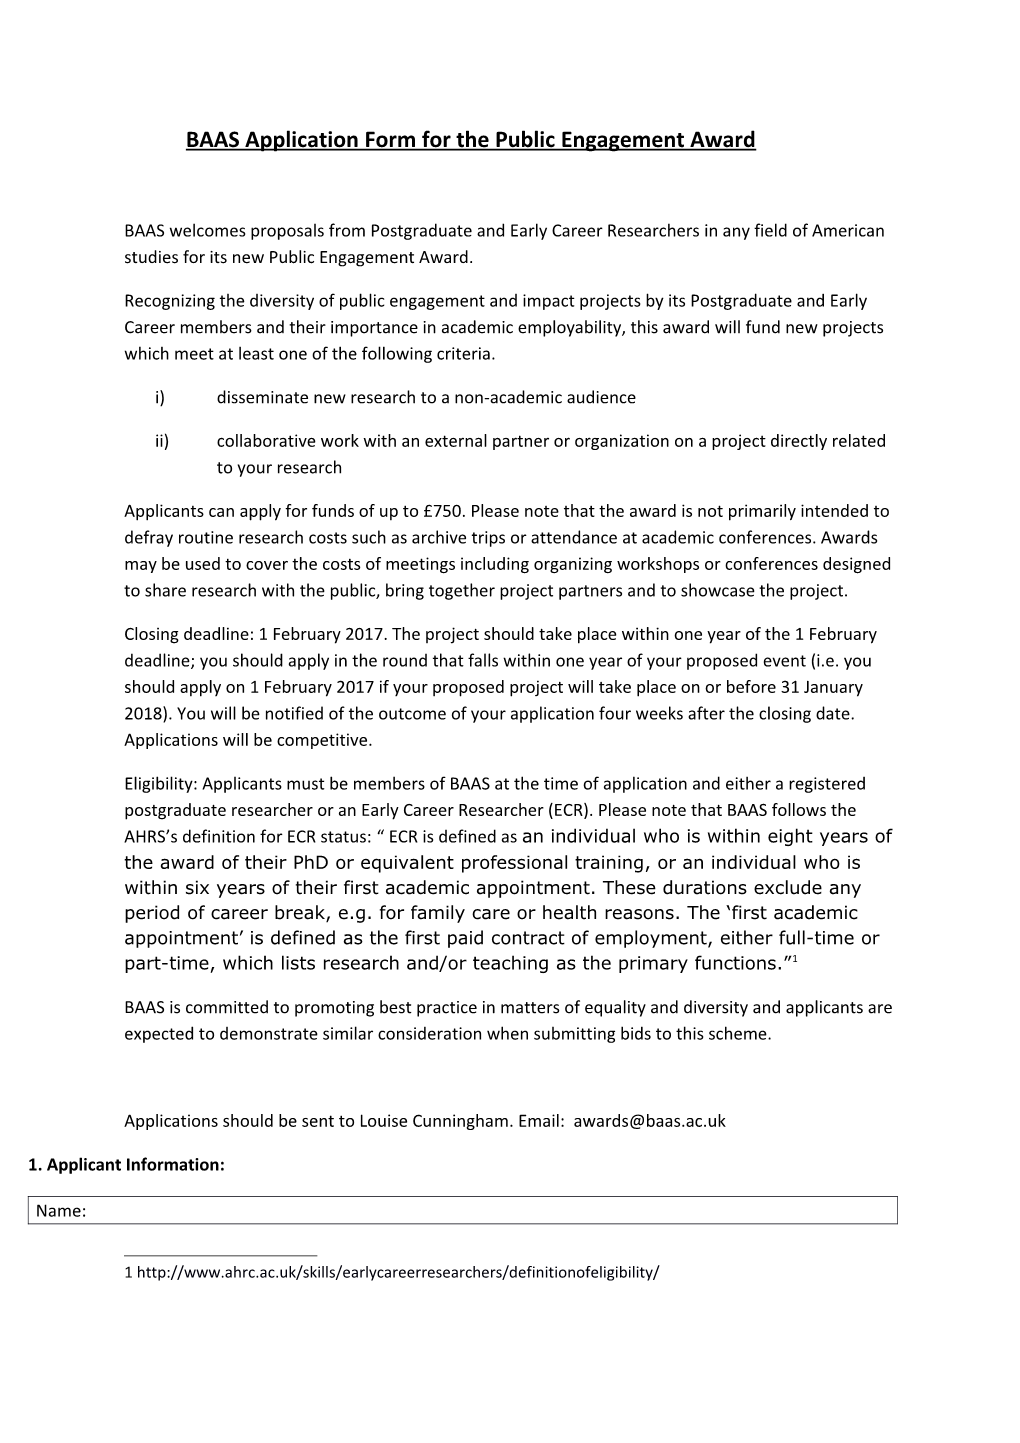 BAAS Application Form for the Public Engagement Award